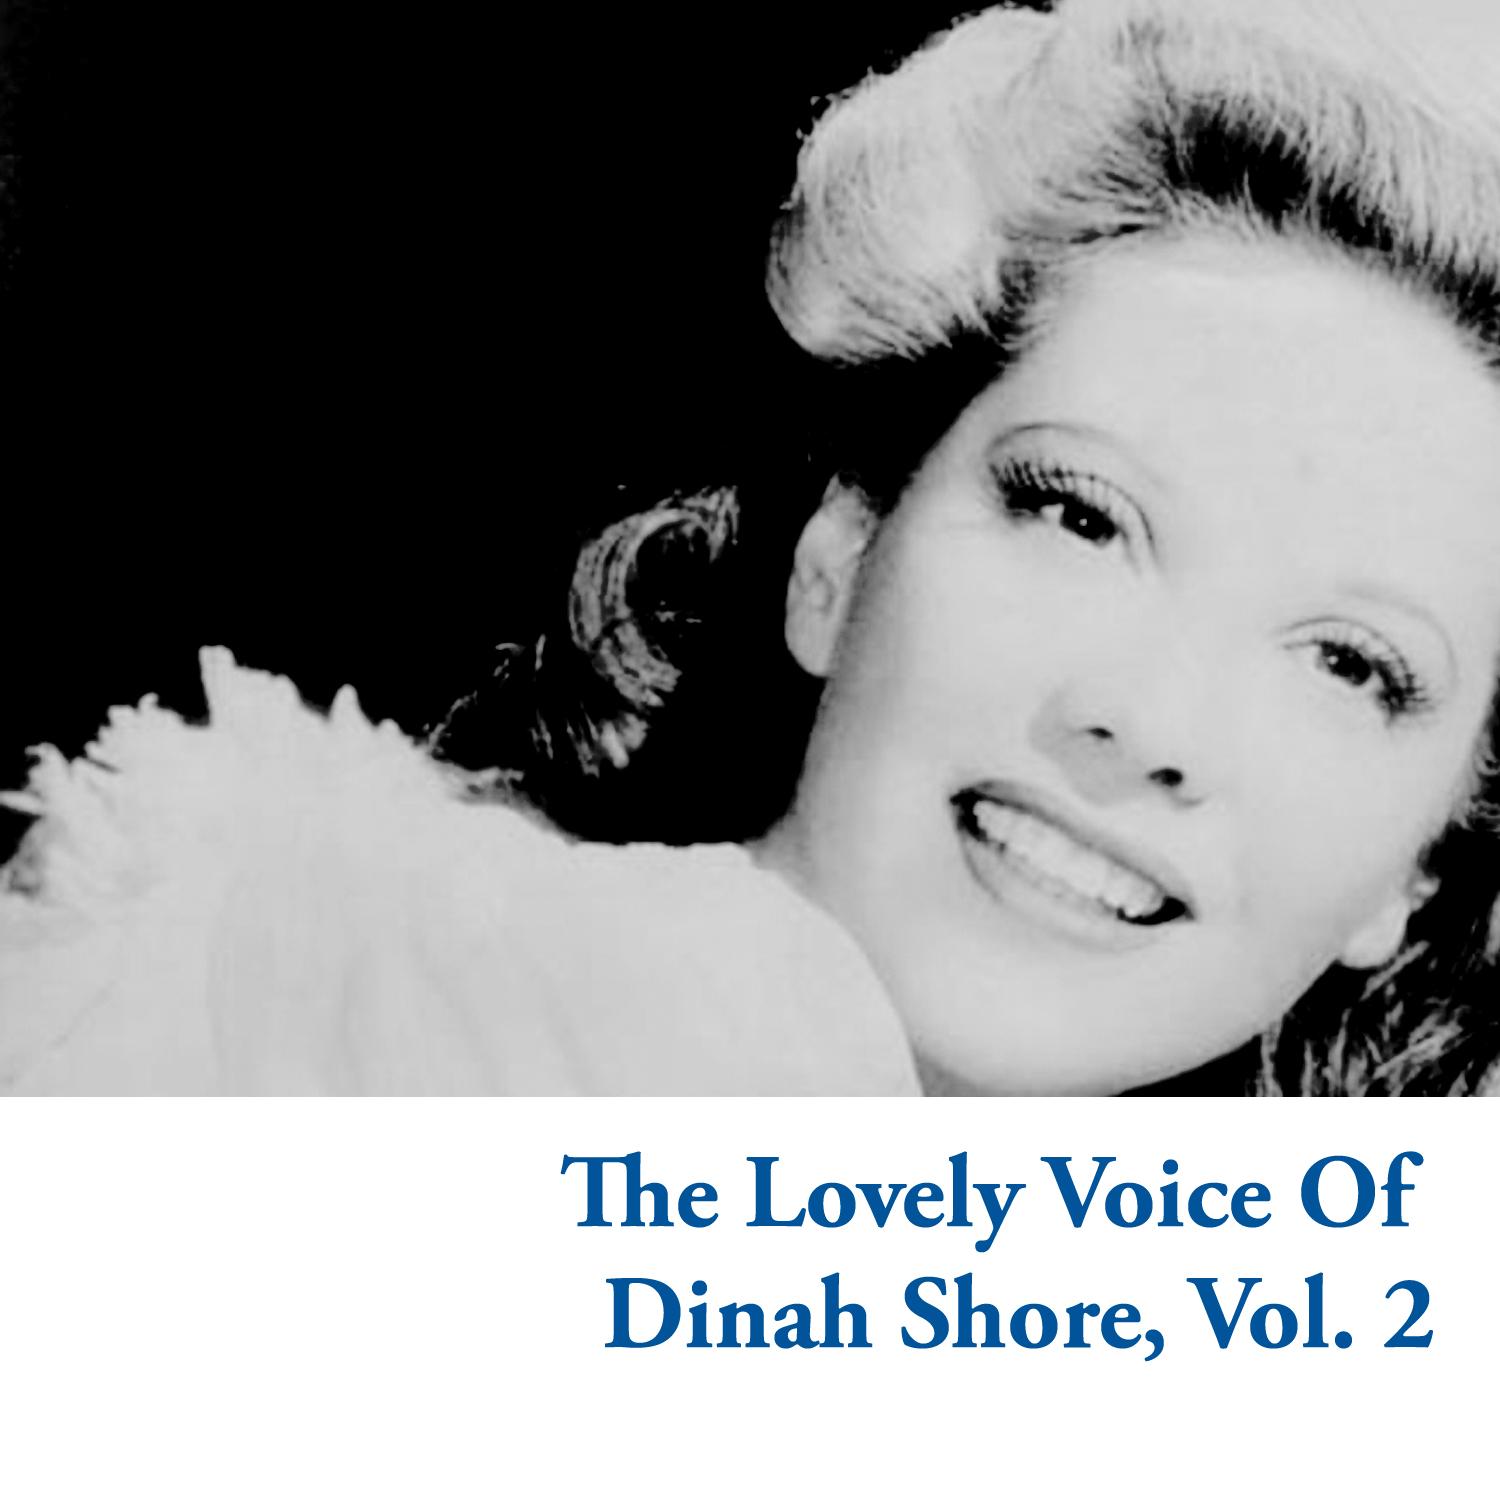 The Lovely Voice of Dinah Shore, Vol. 2